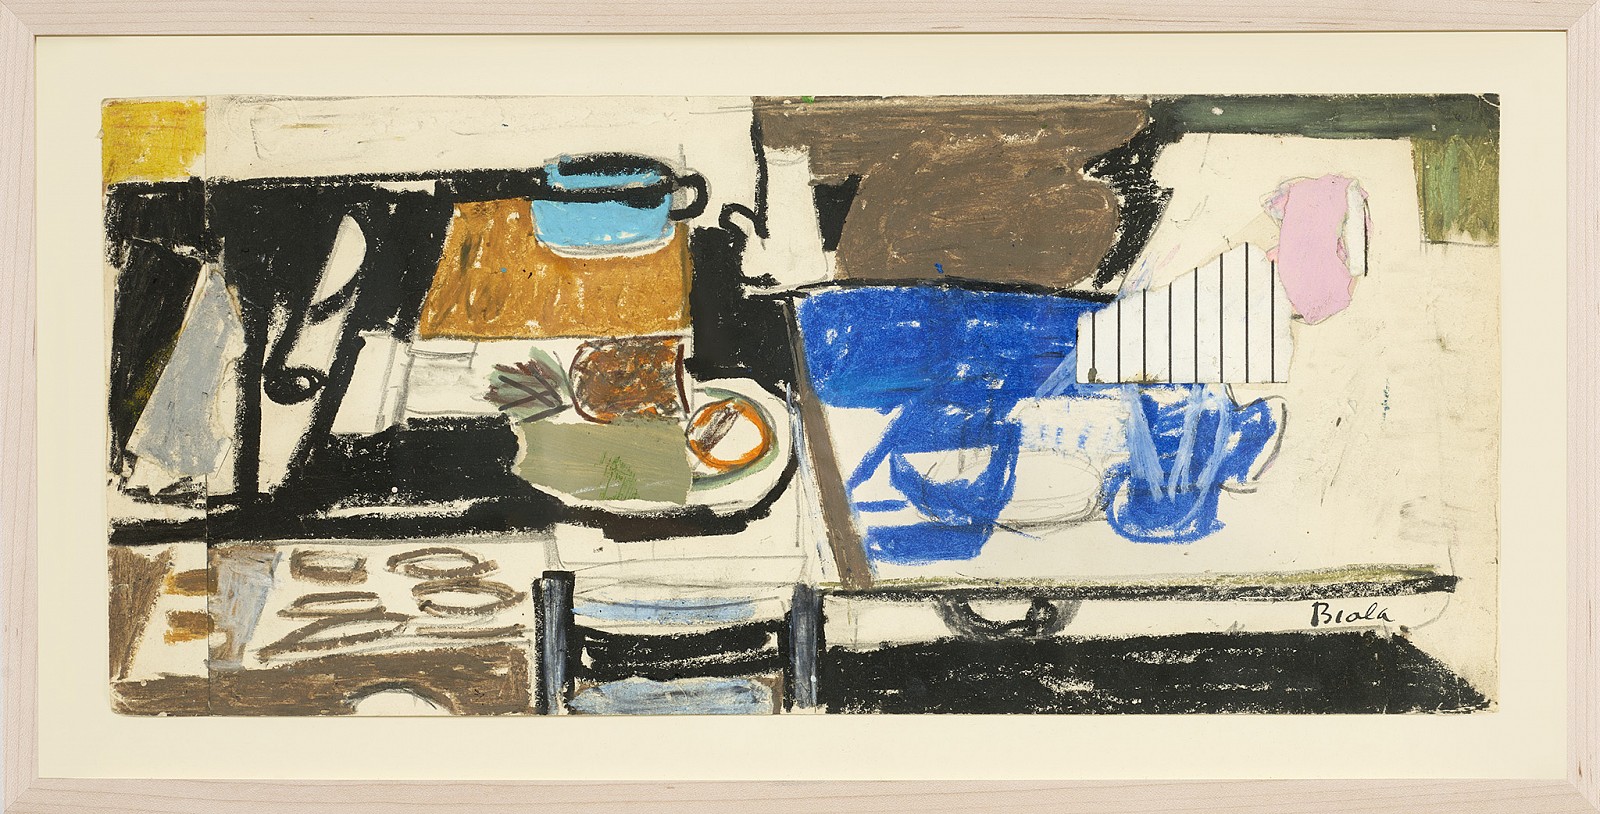 Janice Biala, Untitled (Still life with stove), c.1962
Oil pastel and collage on paper, 8 1/2 x 19 1/8 in. (21.6 x 48.6 cm)
BIAL-00054